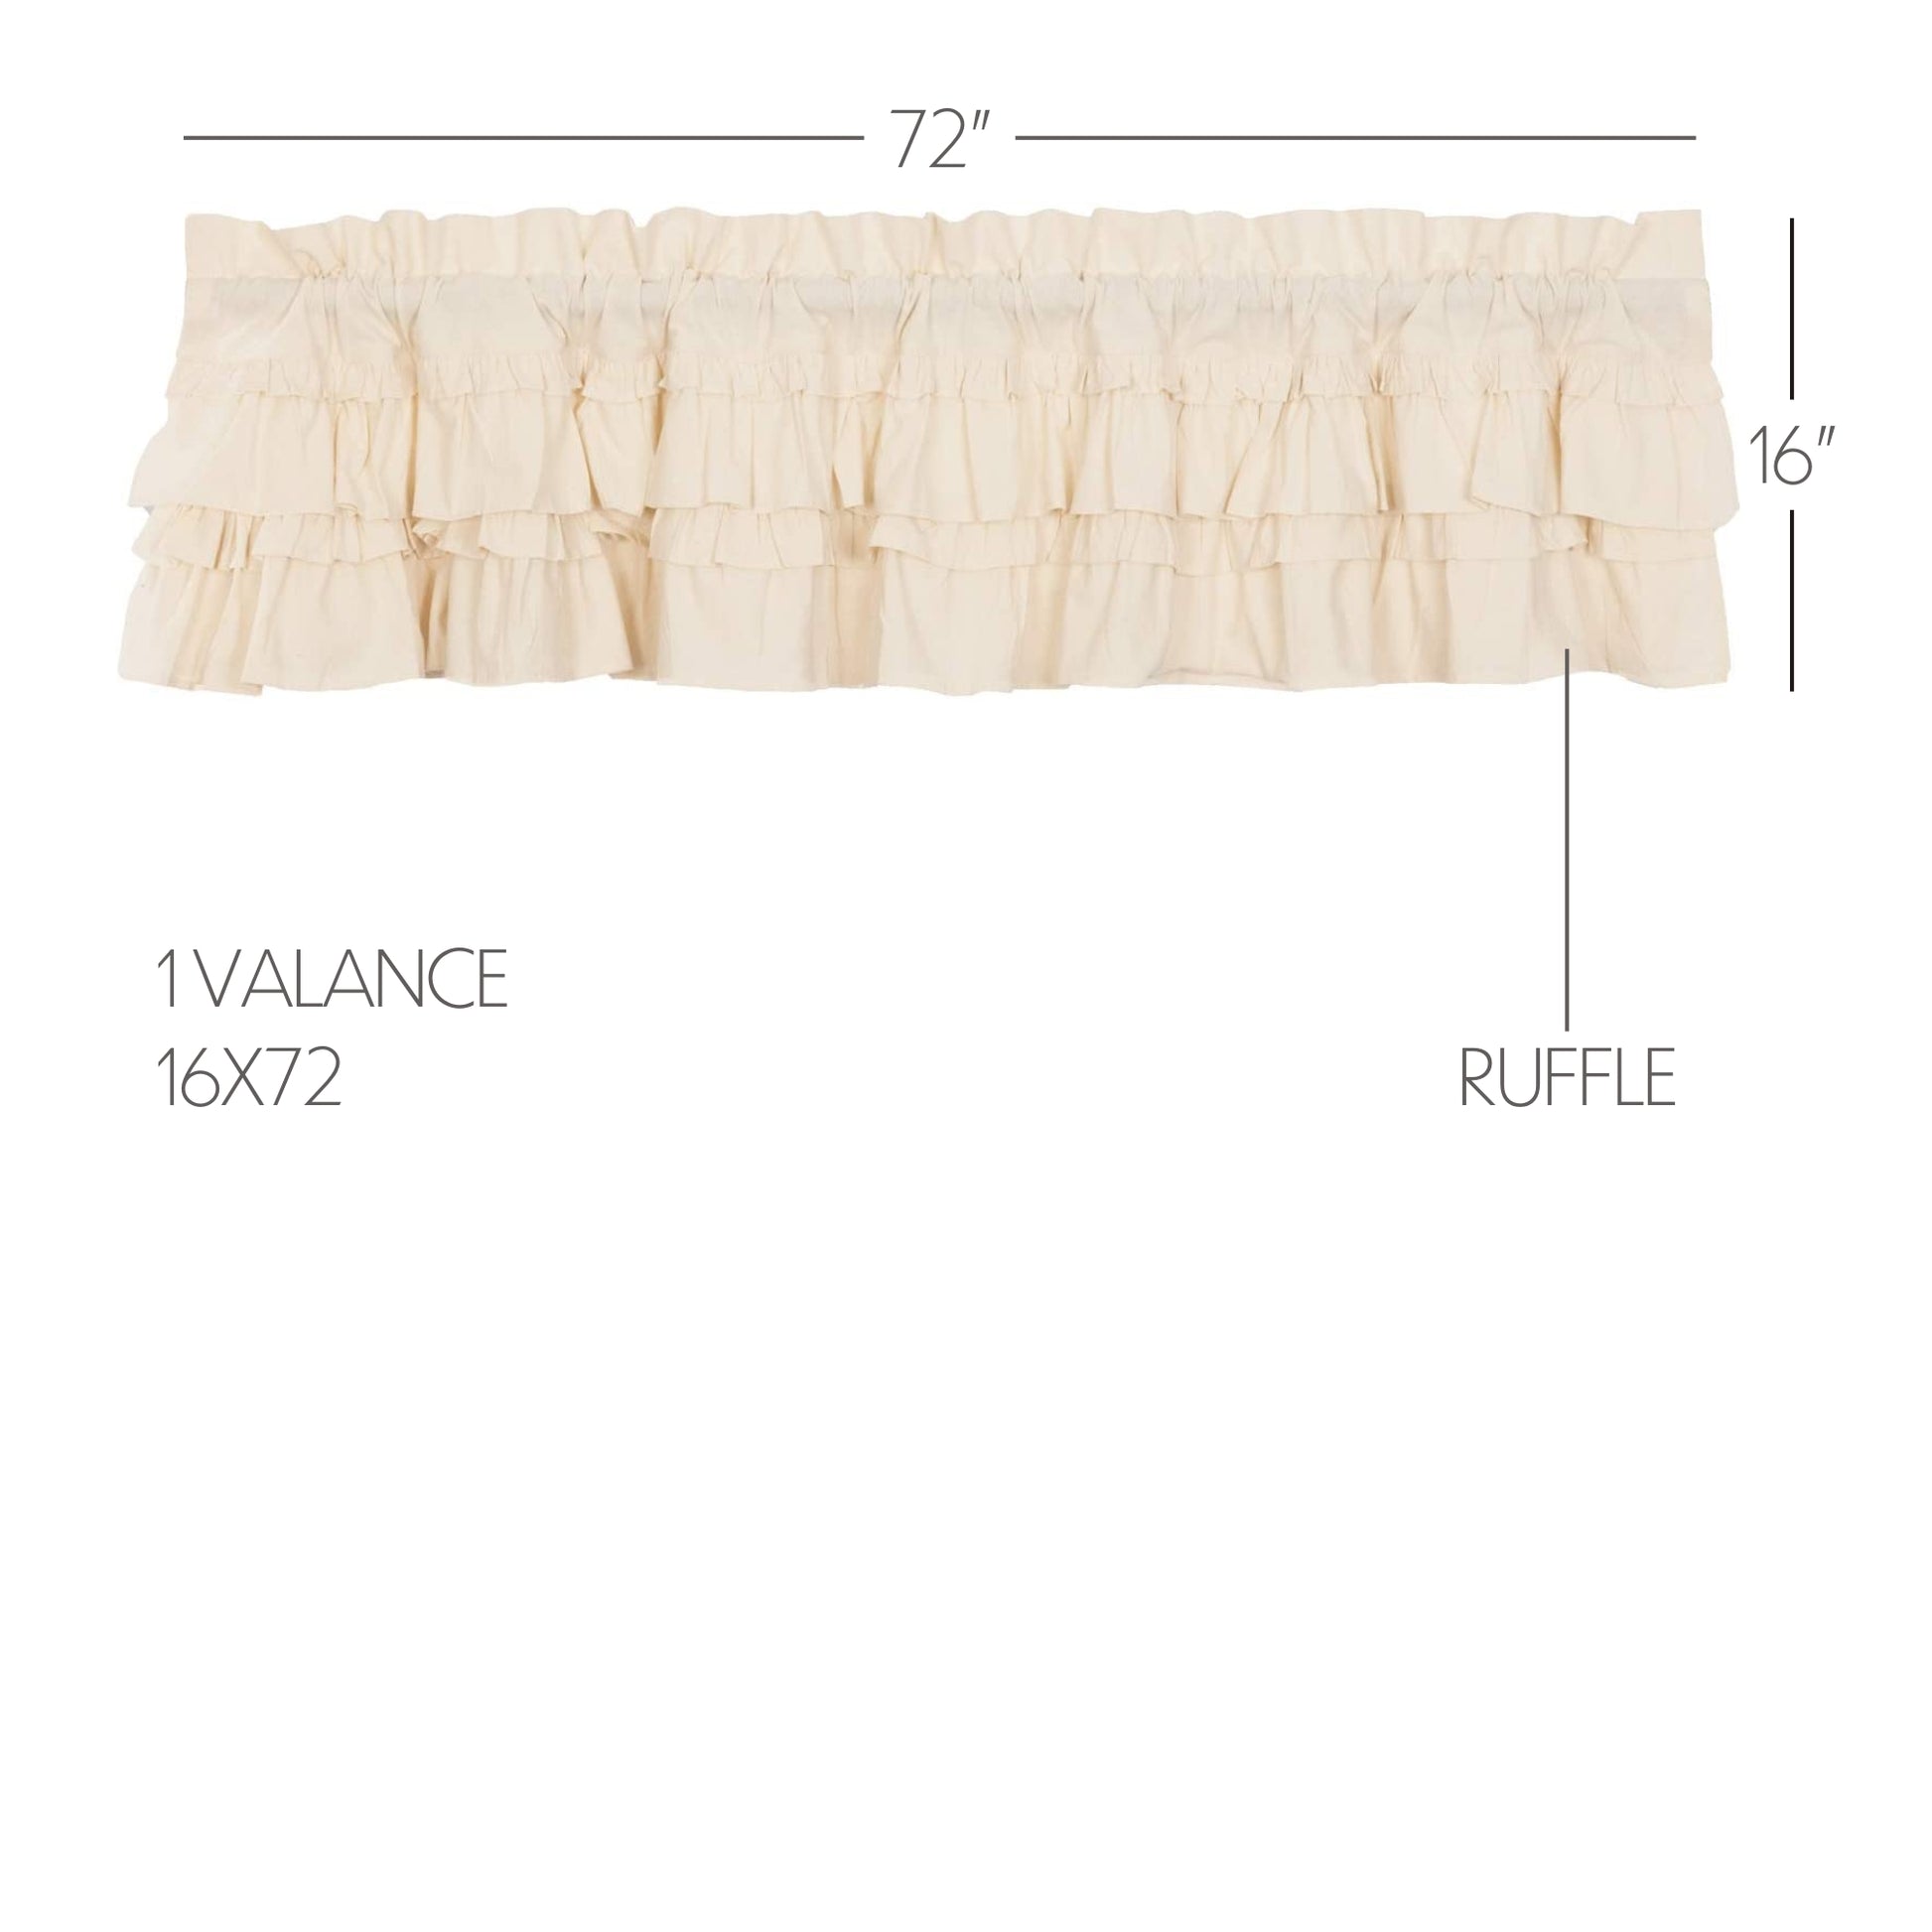 51992-Muslin-Ruffled-Unbleached-Natural-Valance-16x72-image-1